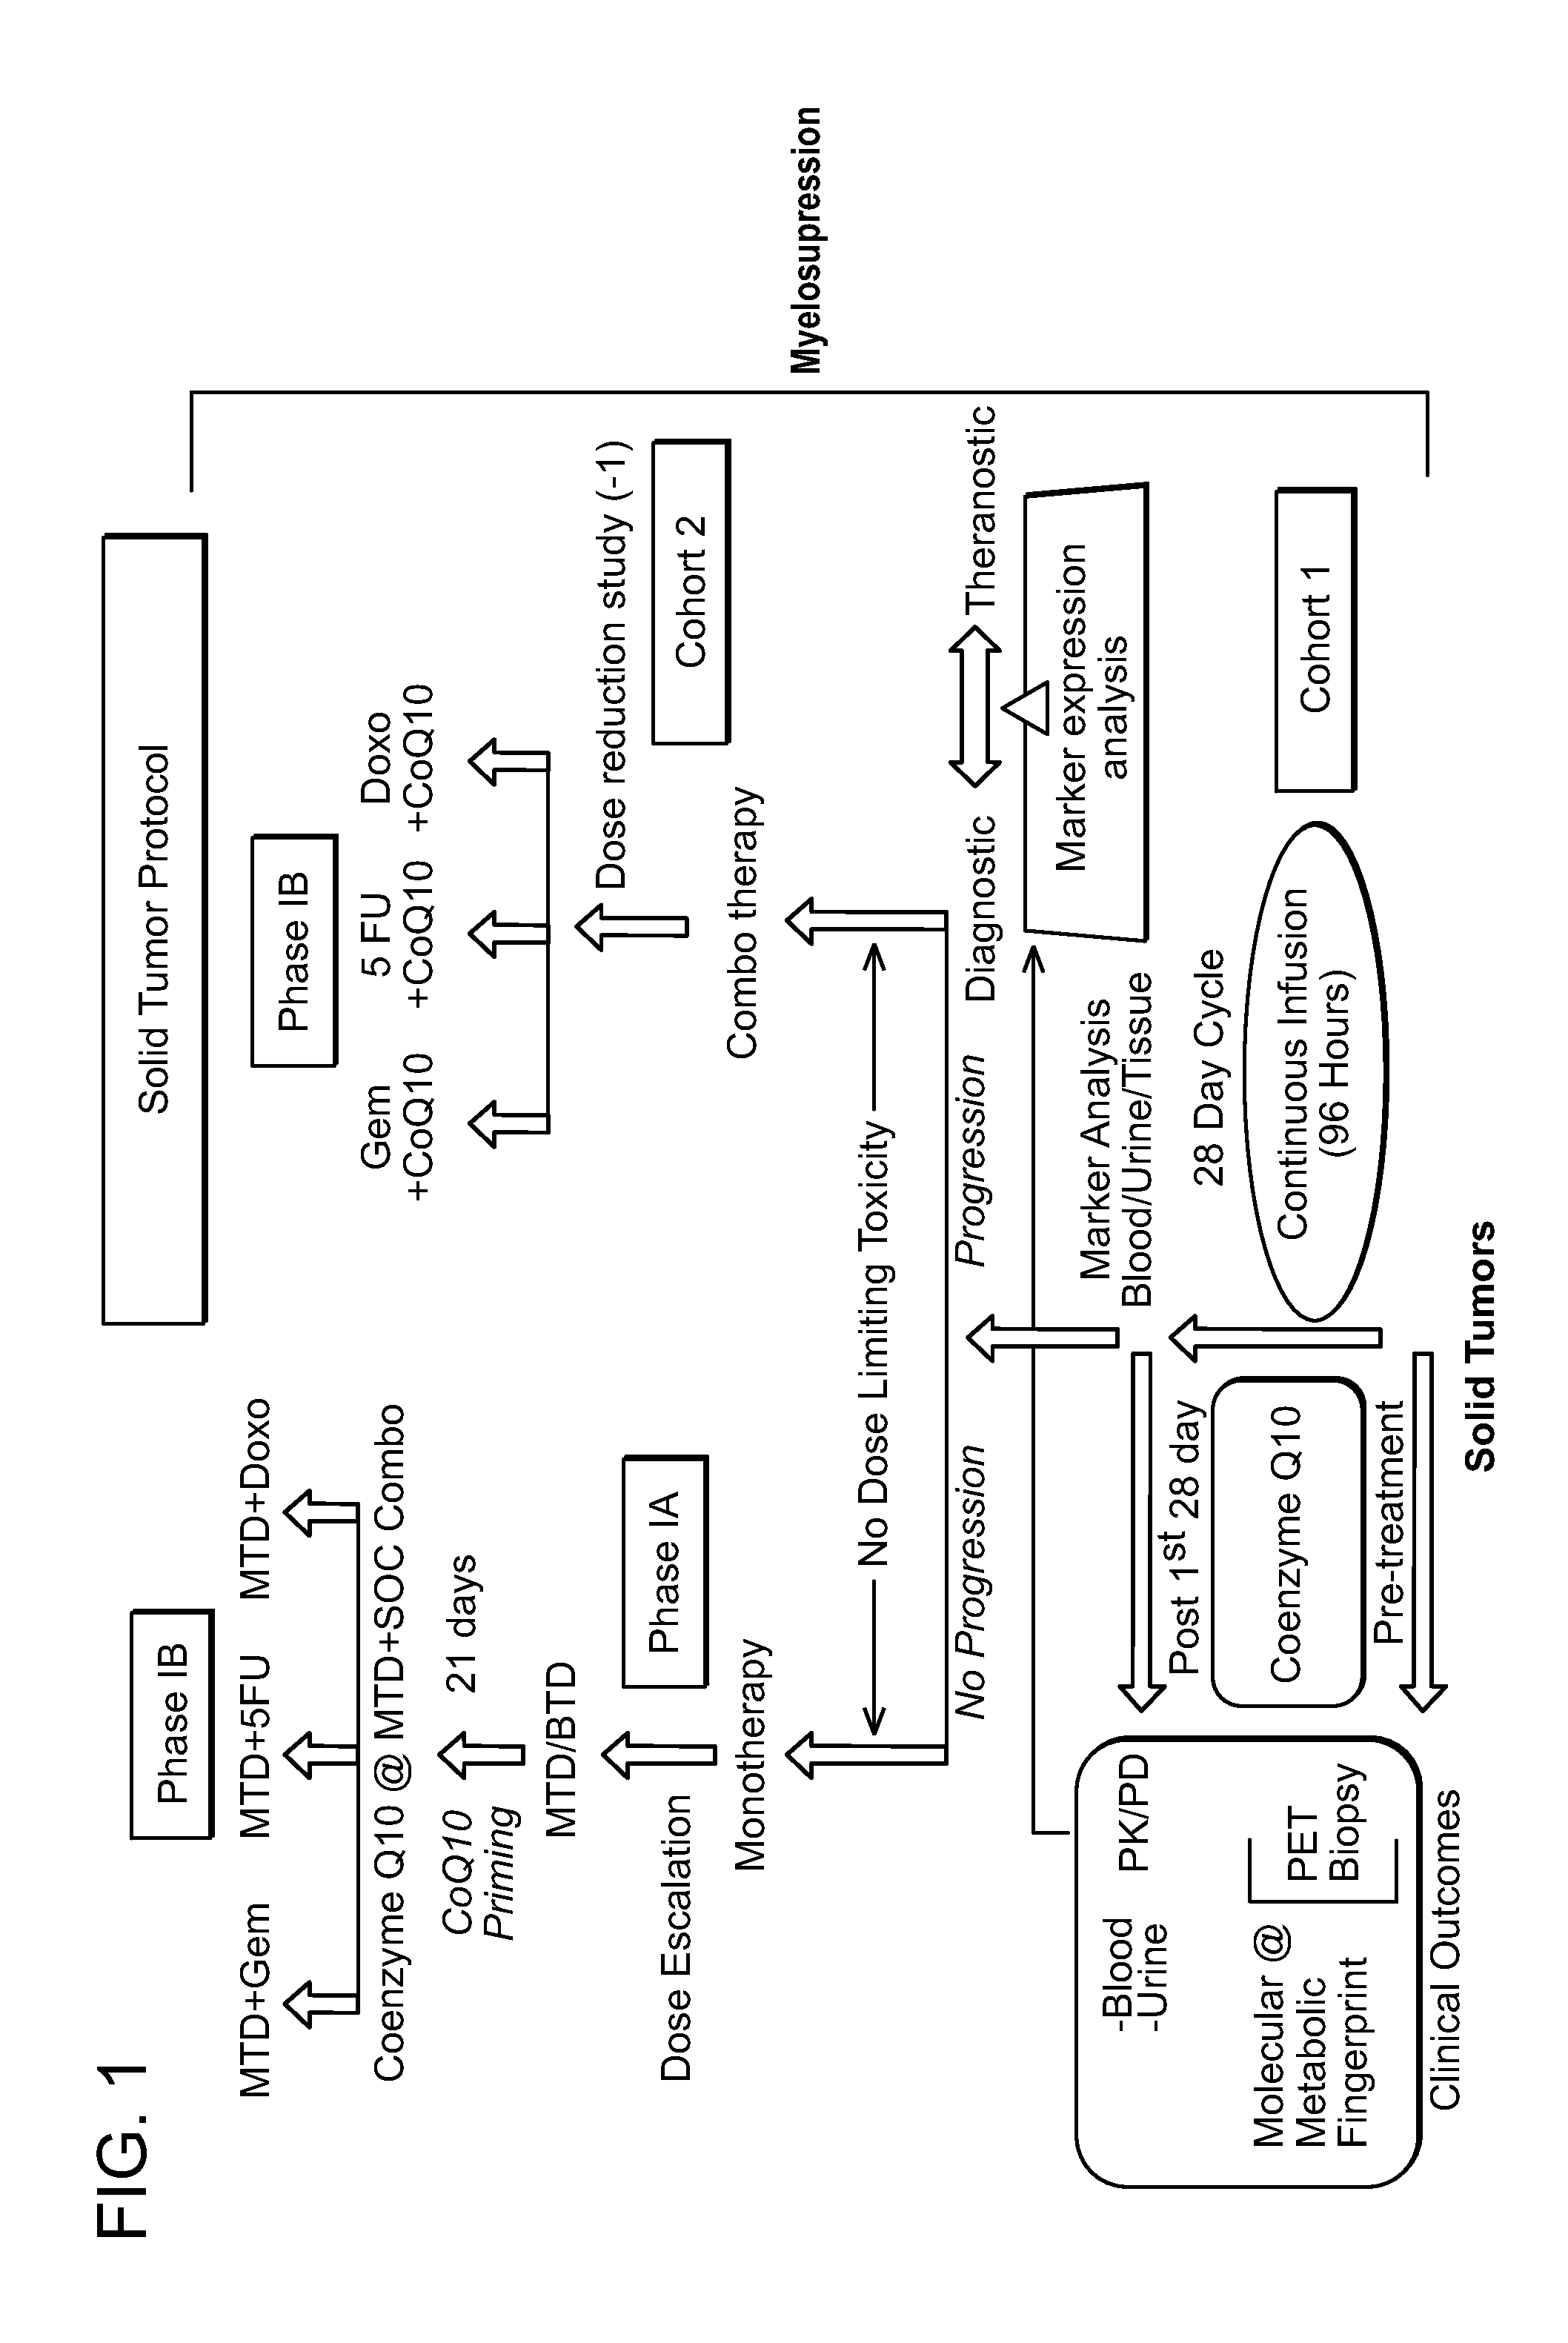 Methods of treatment of cancer by continuous infusion of coenzyme q10